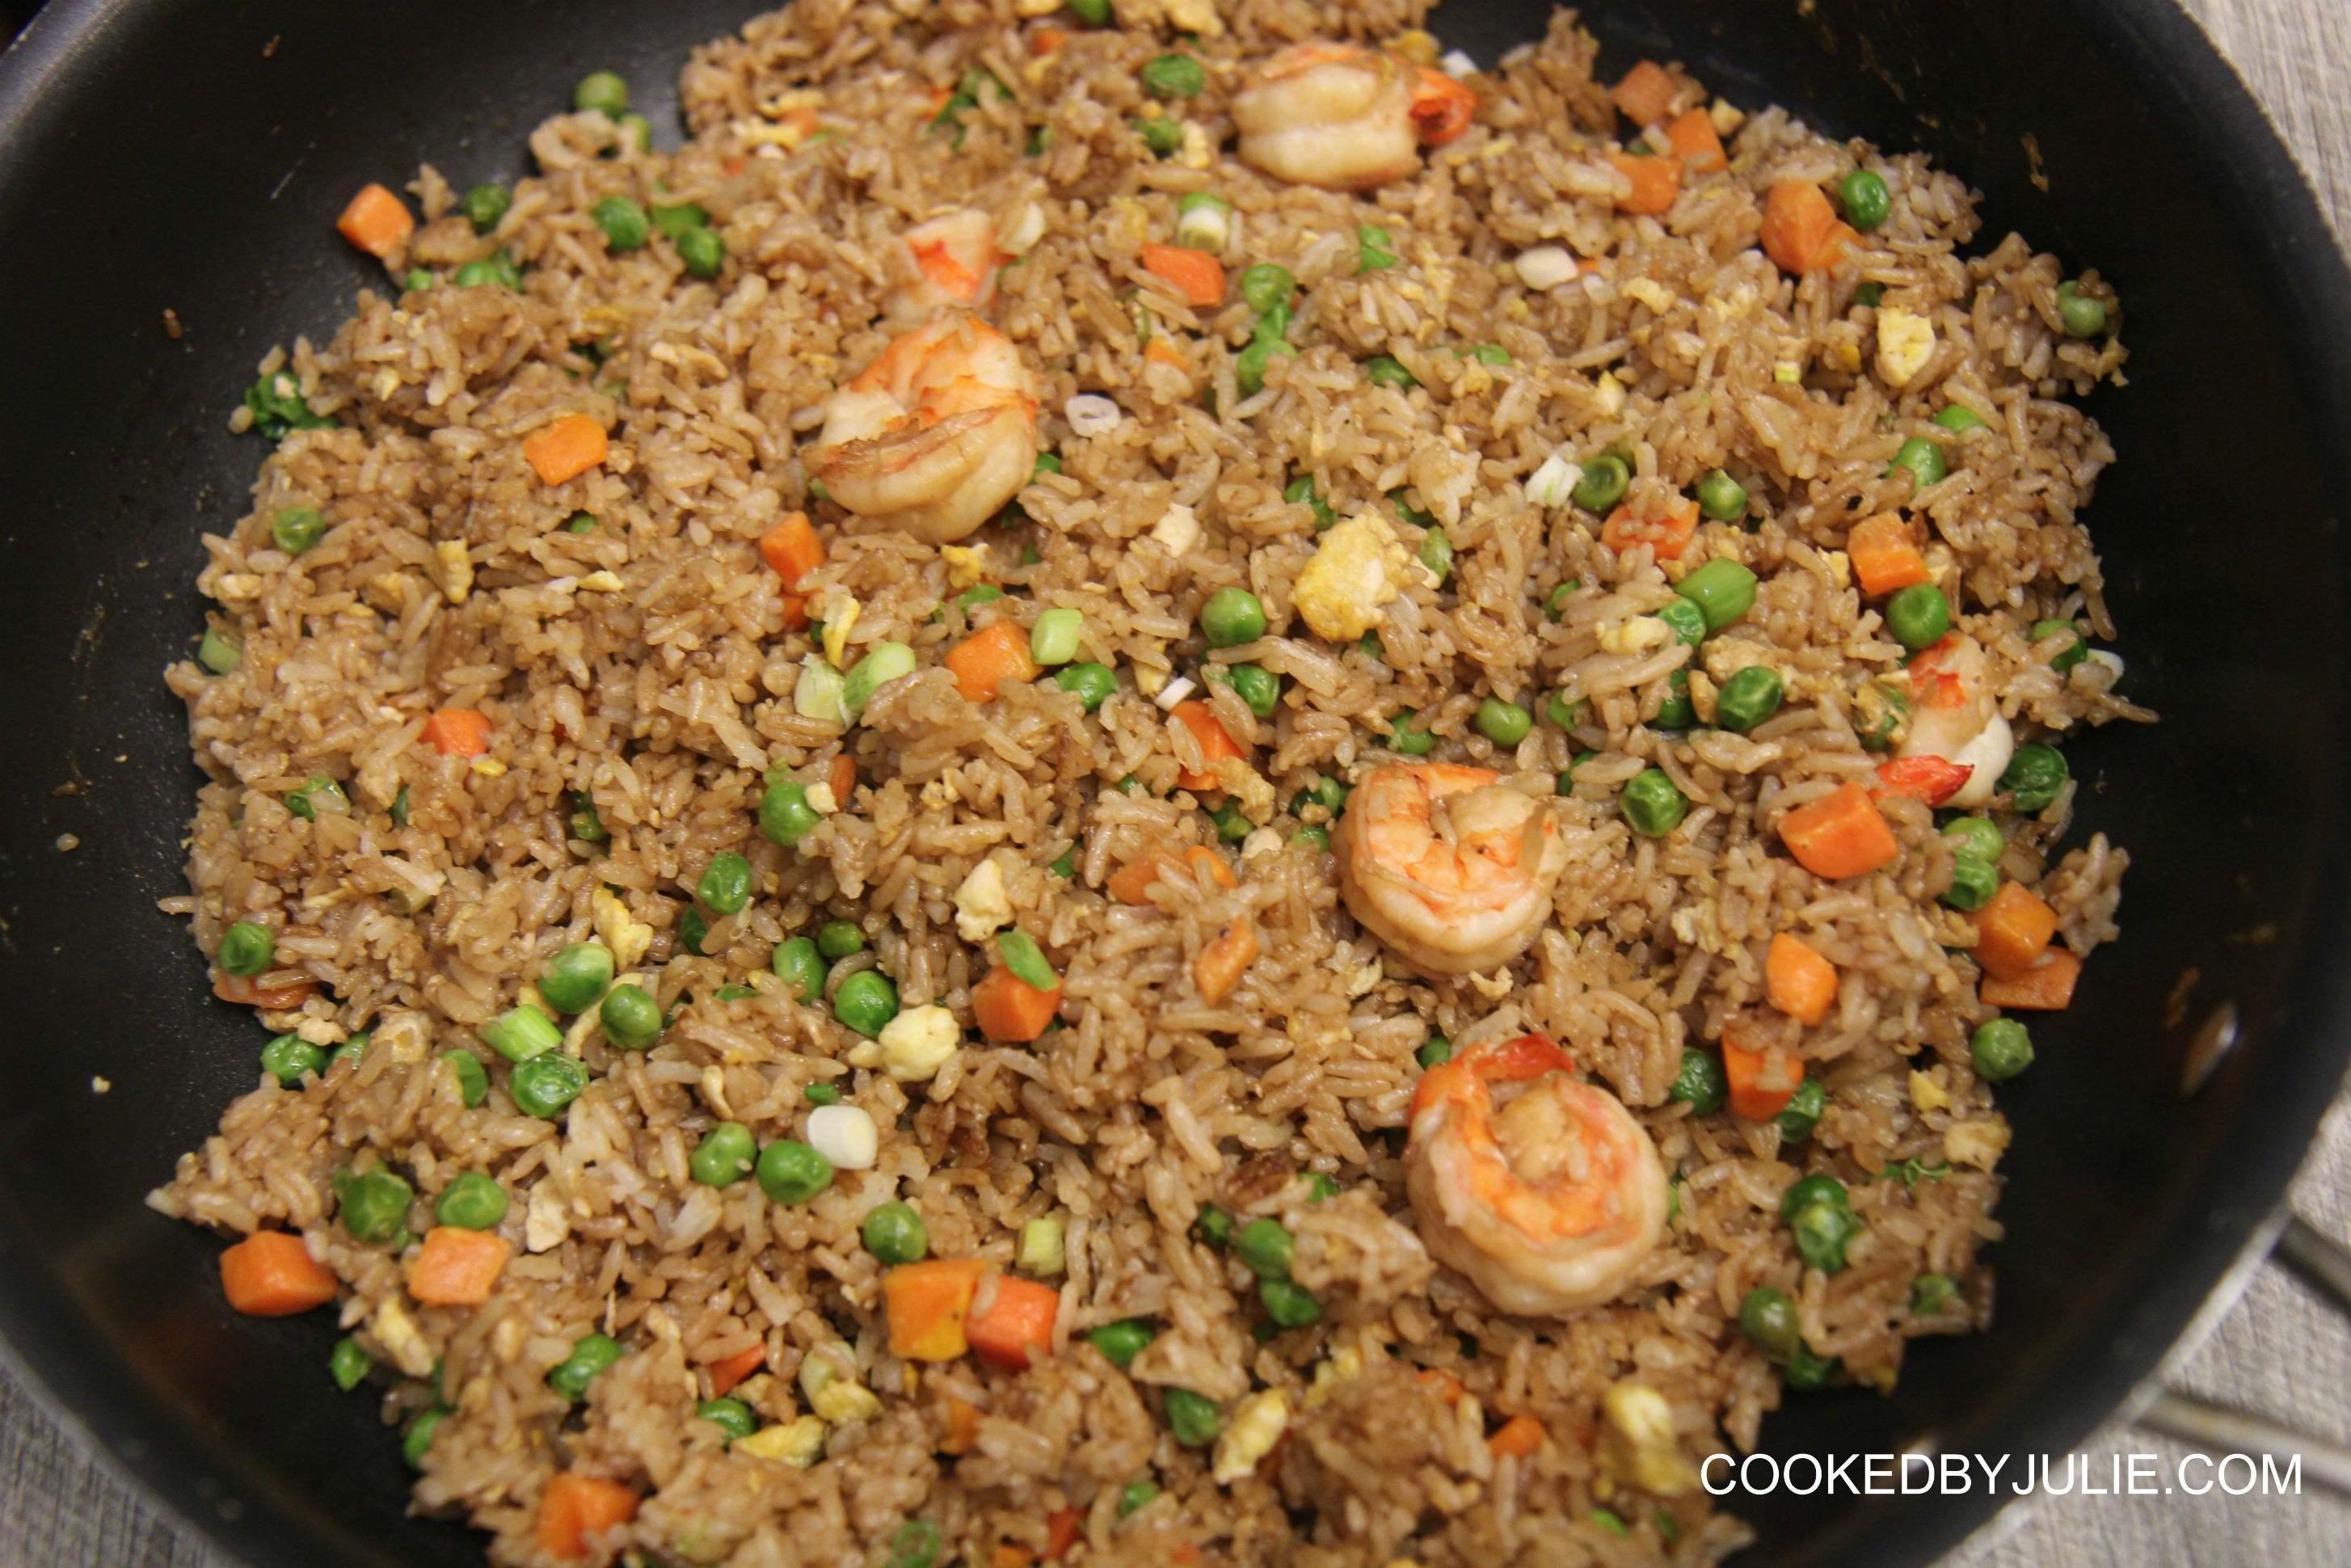 Your favorite takeout fried rice can now be made right at home! This shrimp fried rice recipe is better than takeout and easy to make!